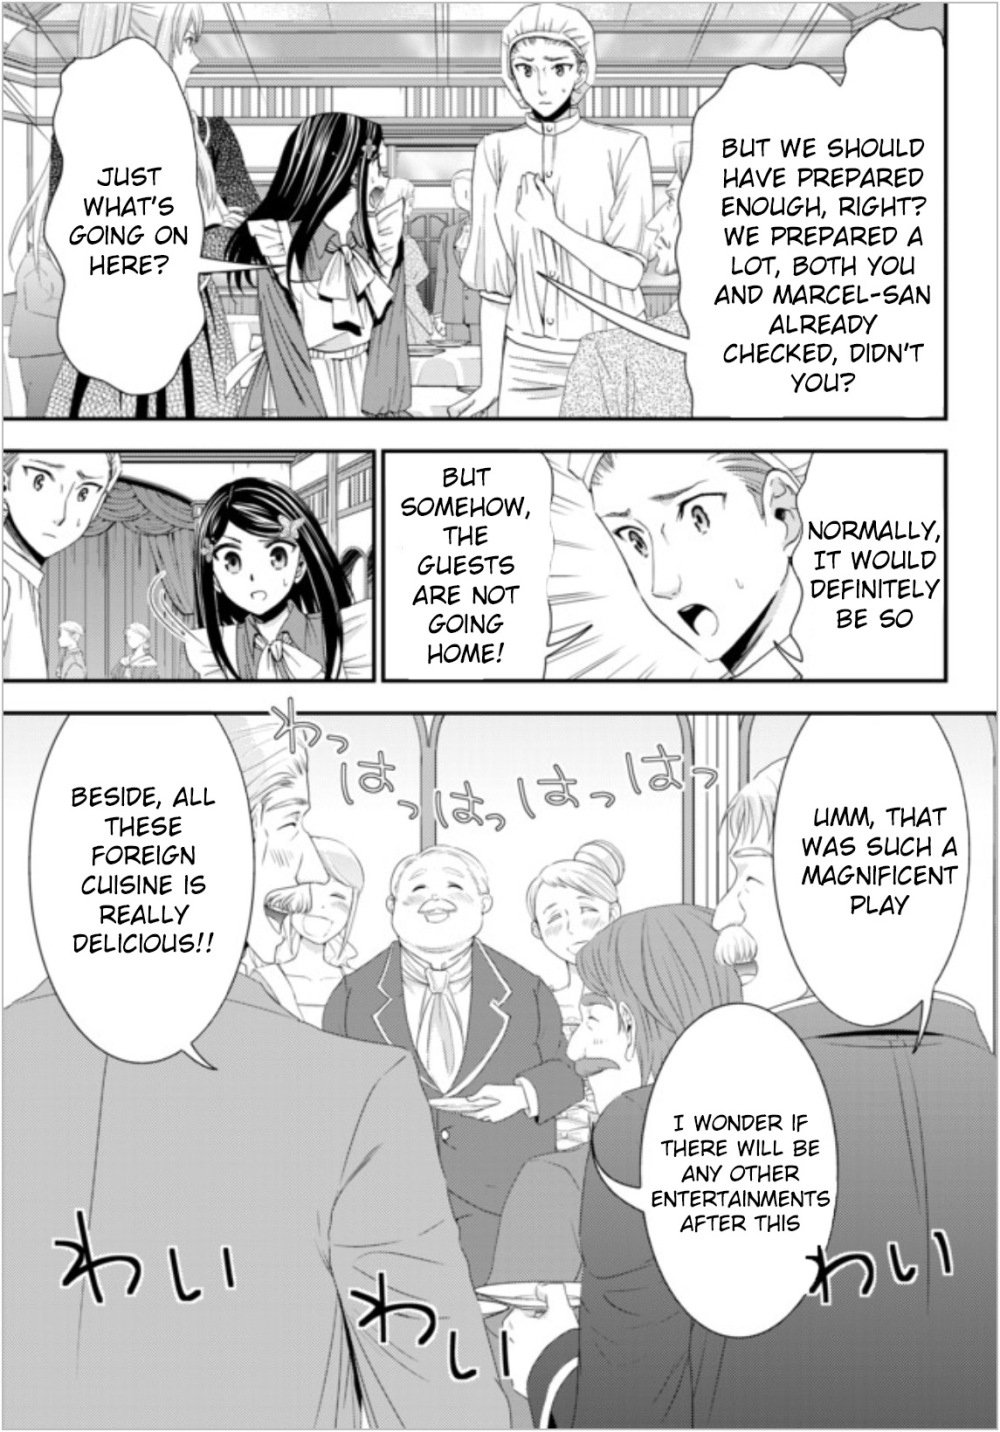 Saving 80,000 Gold Coins in the Different World for My Old Age Vol. 2 Ch. 16 Final Weapon